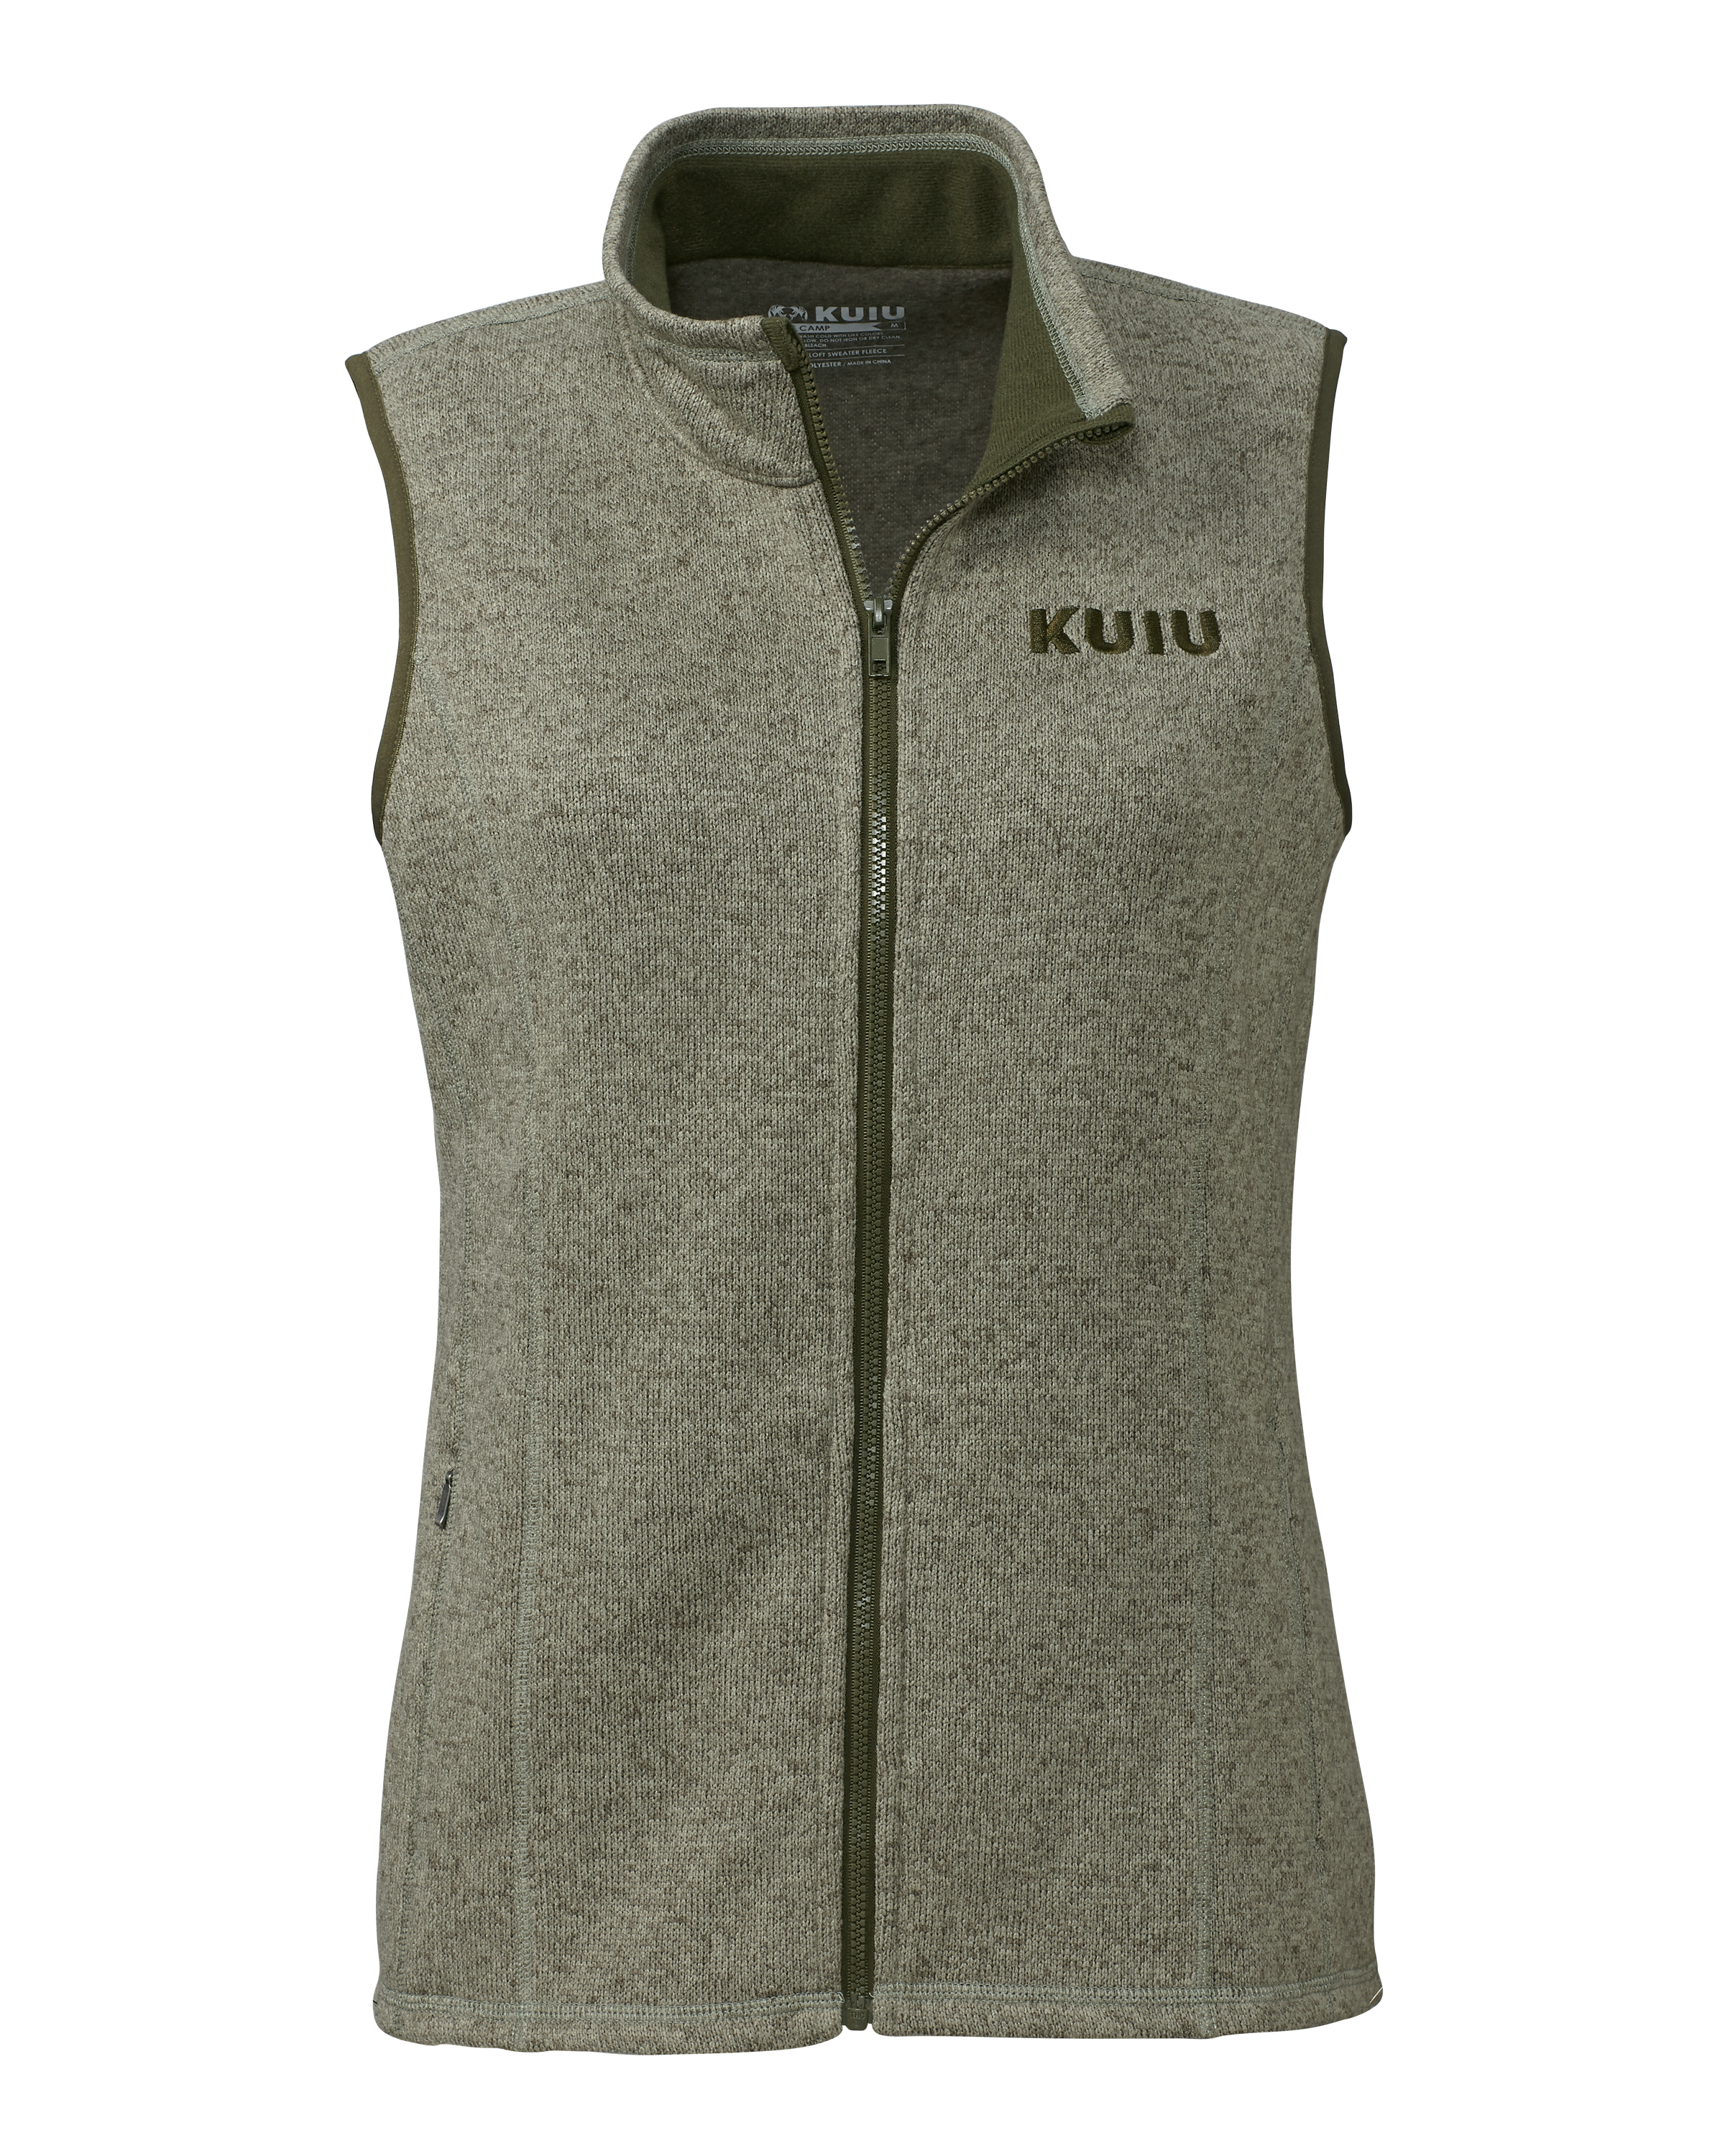 KUIU Outlet Women's Base Camp Sweater Vest in Heather Olive | Size XL